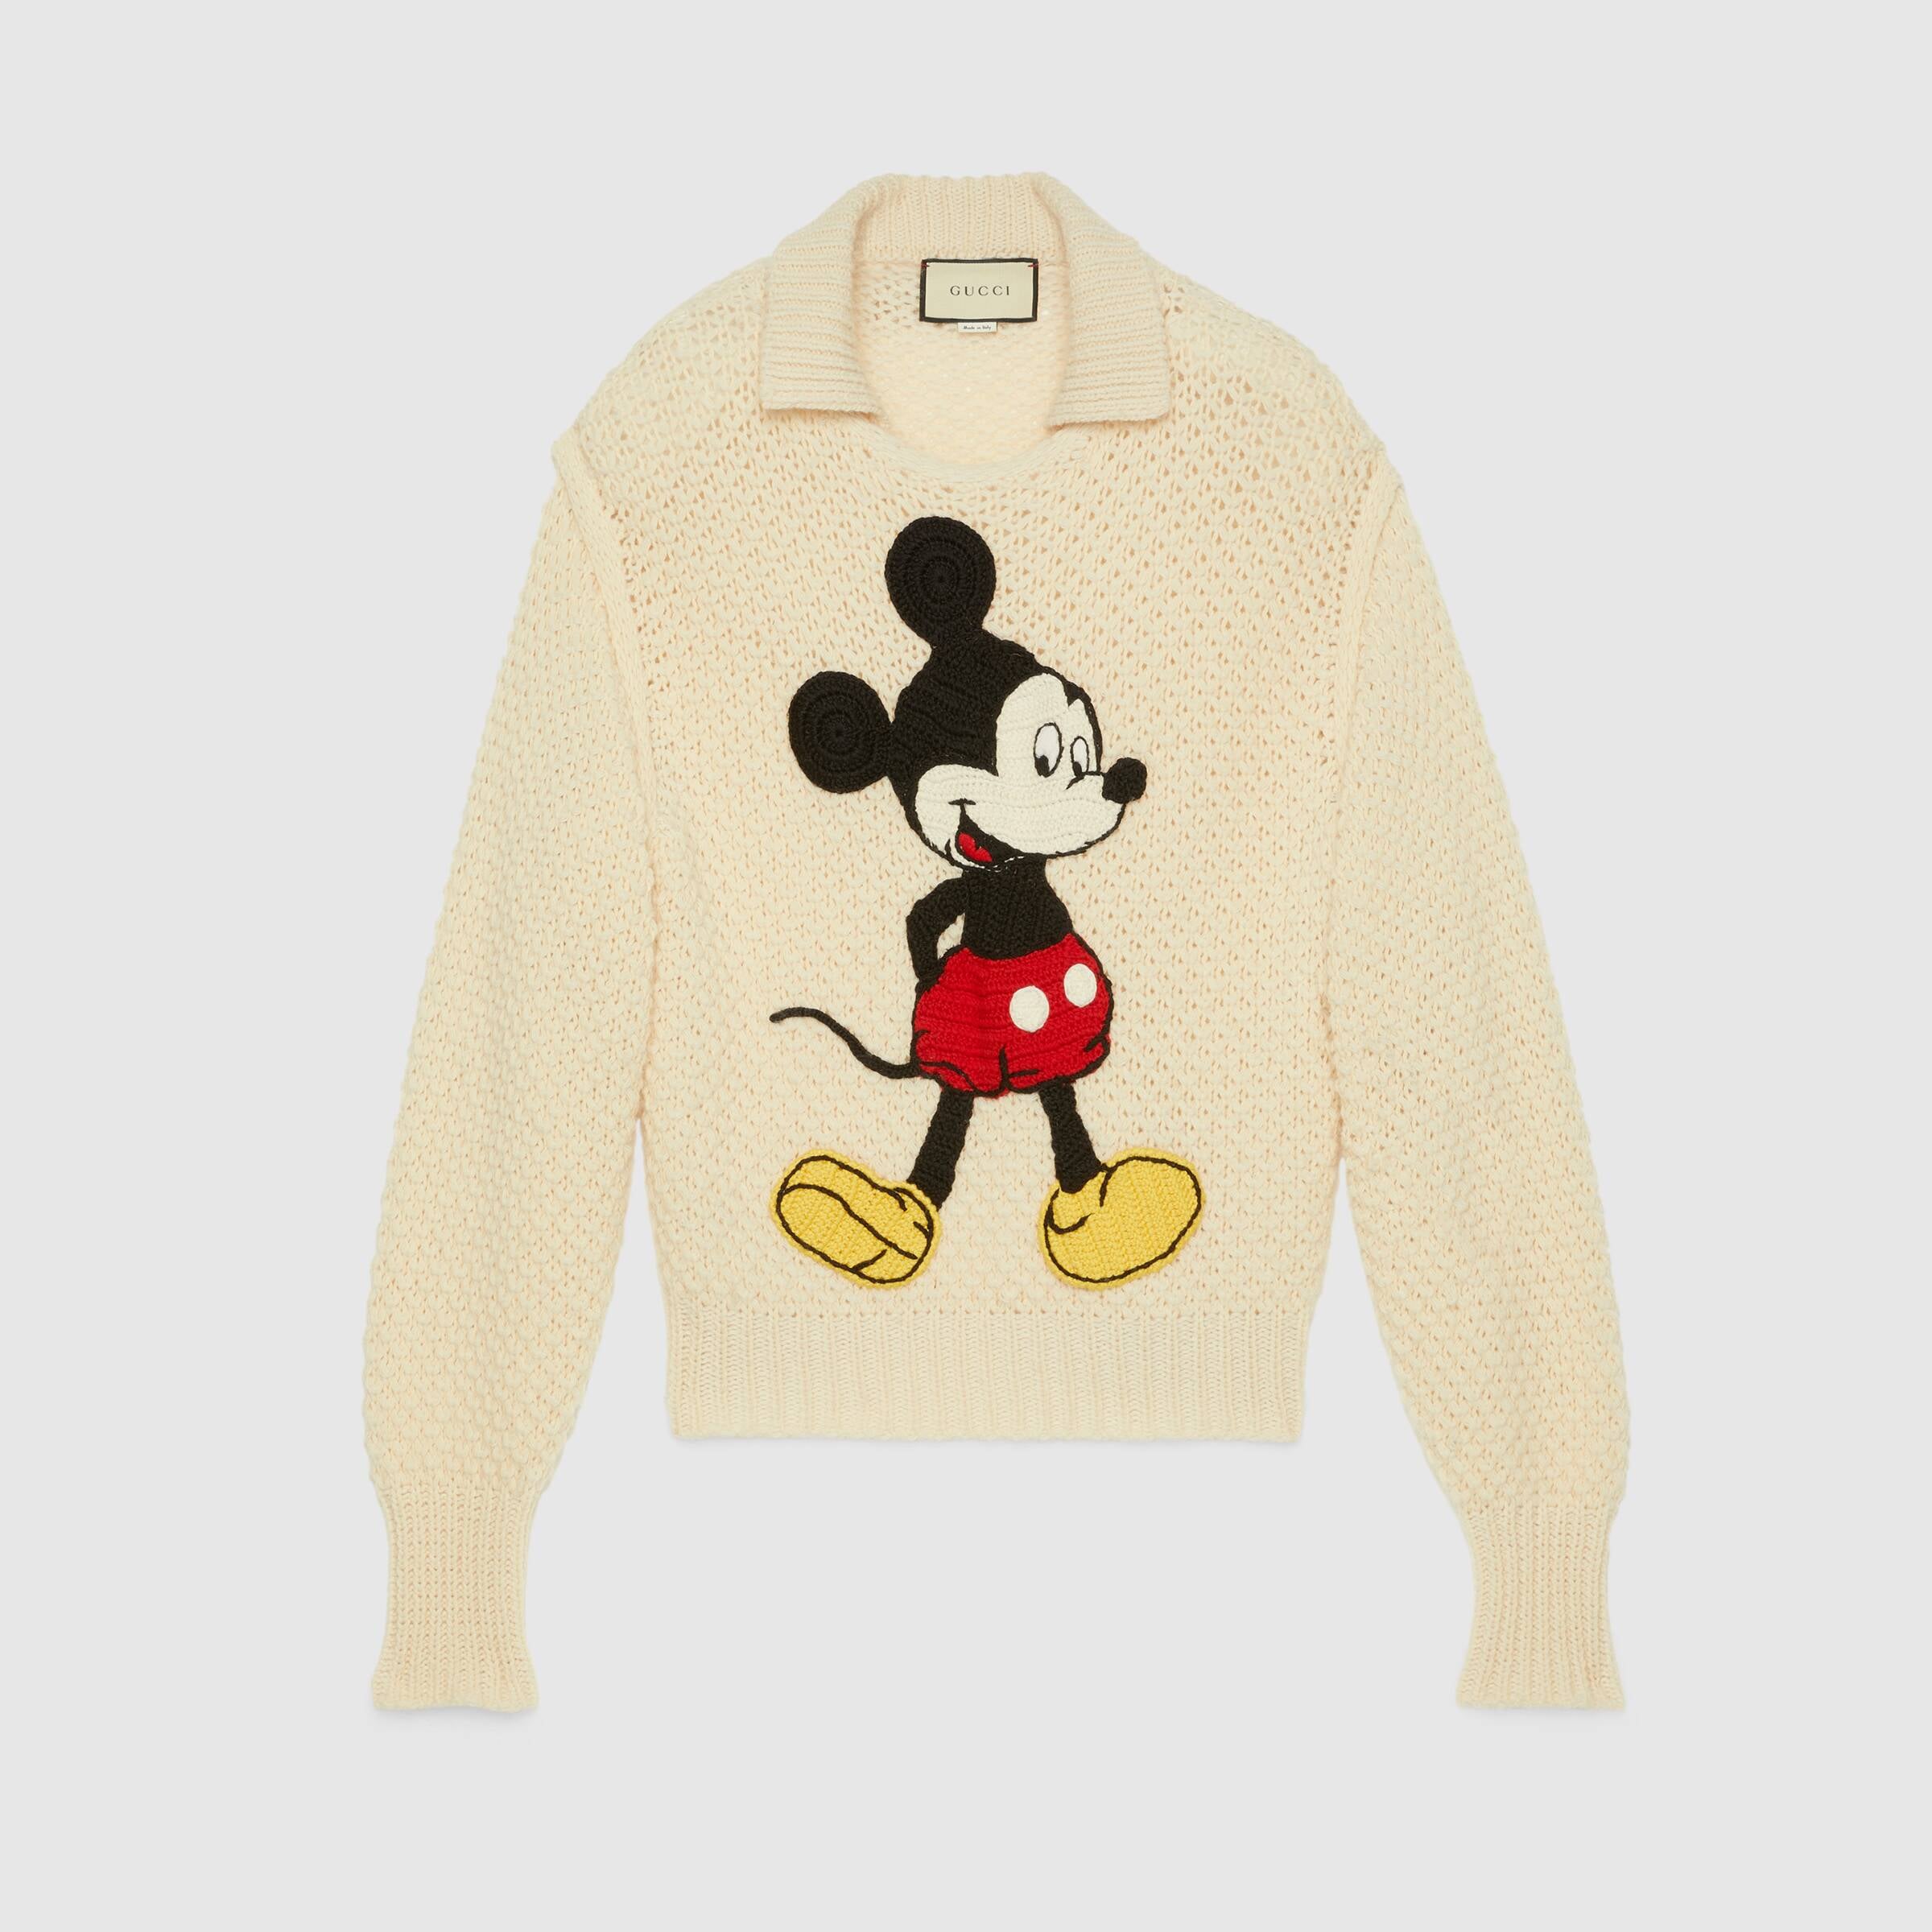 If You Like Gucci With Mickey Mouse Shirt